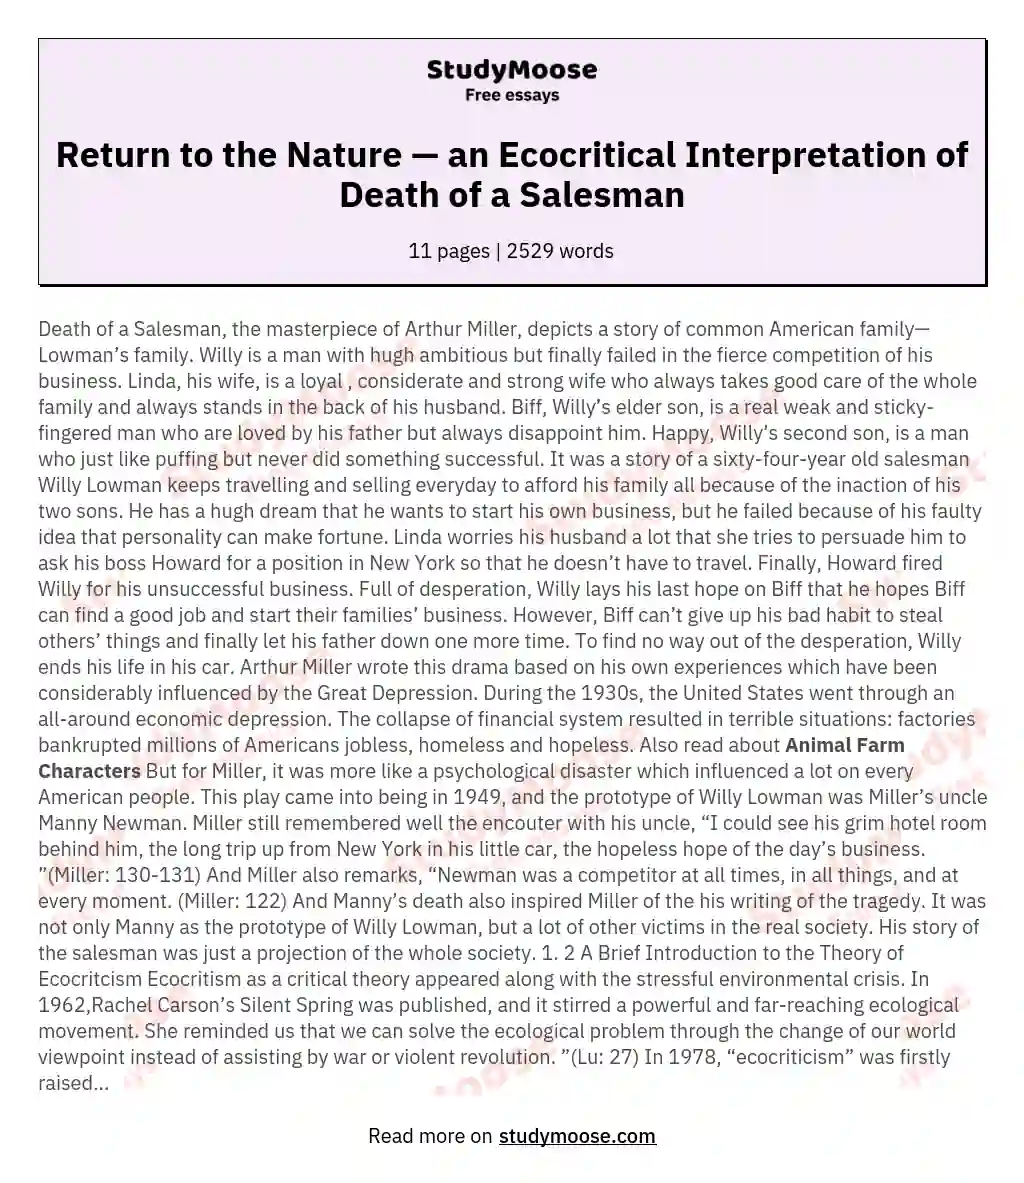 Return to the Nature — an Ecocritical Interpretation of Death of a Salesman